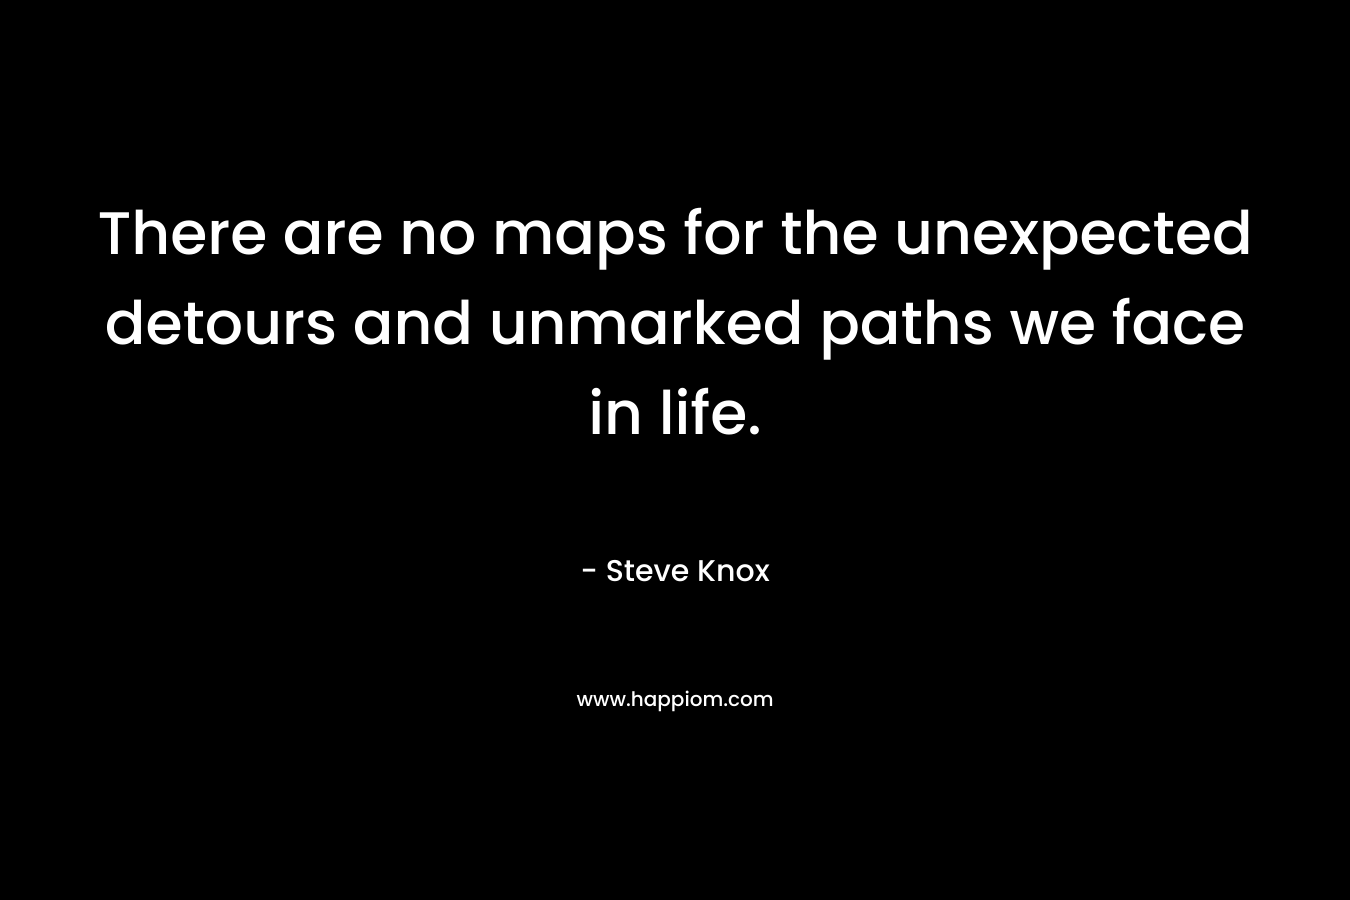 There are no maps for the unexpected detours and unmarked paths we face in life. – Steve Knox